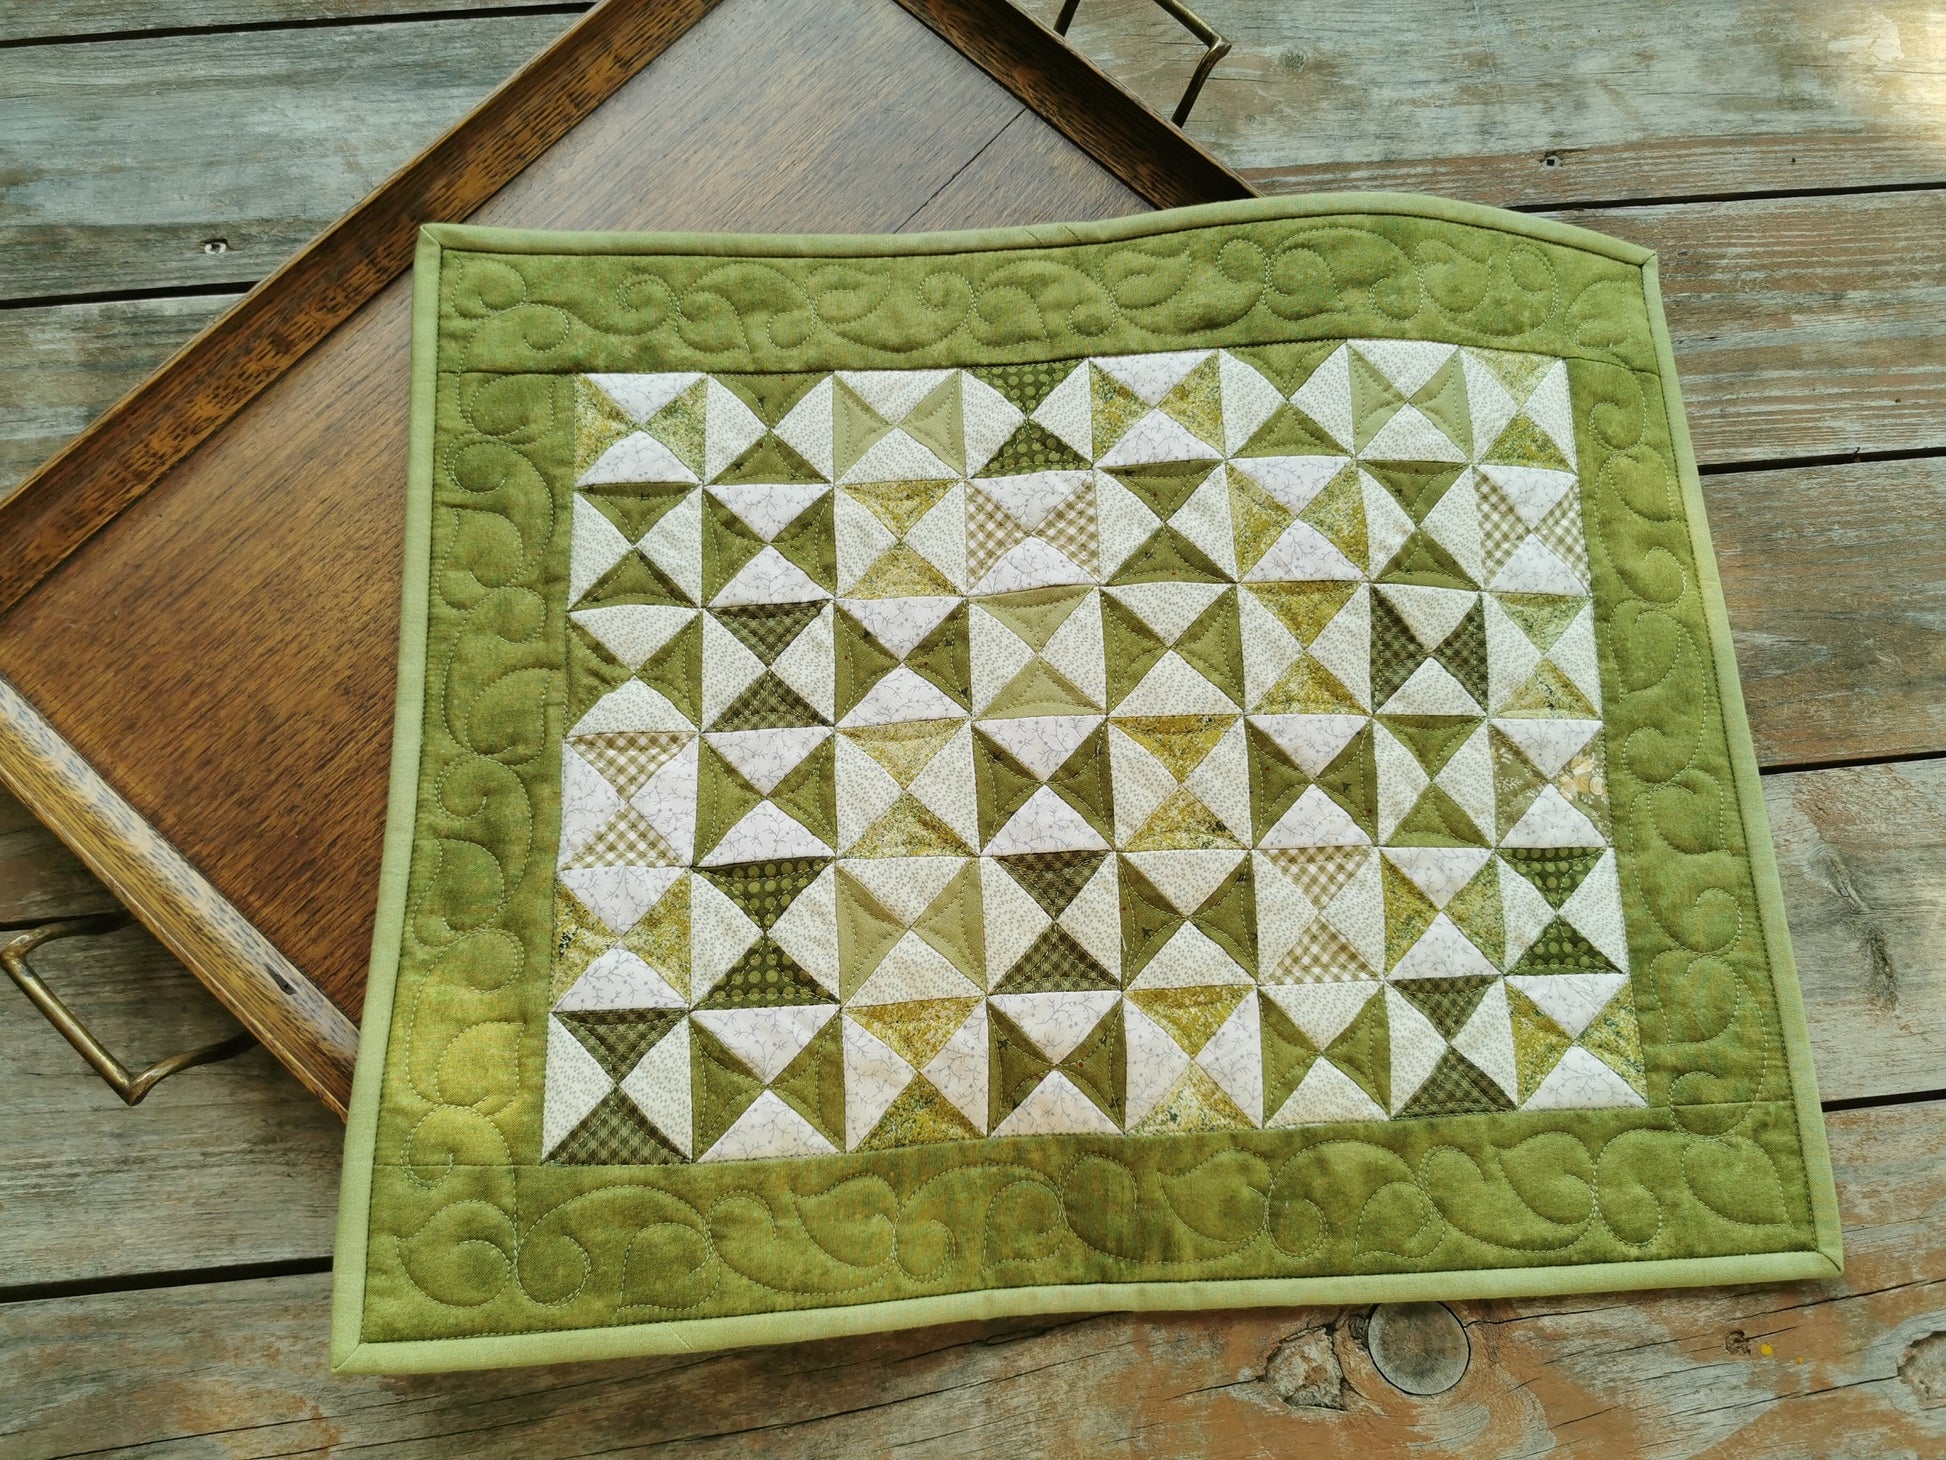 This green patchwork table runner has custom quilting and scrappy piecing to make a one of a kind quilt.